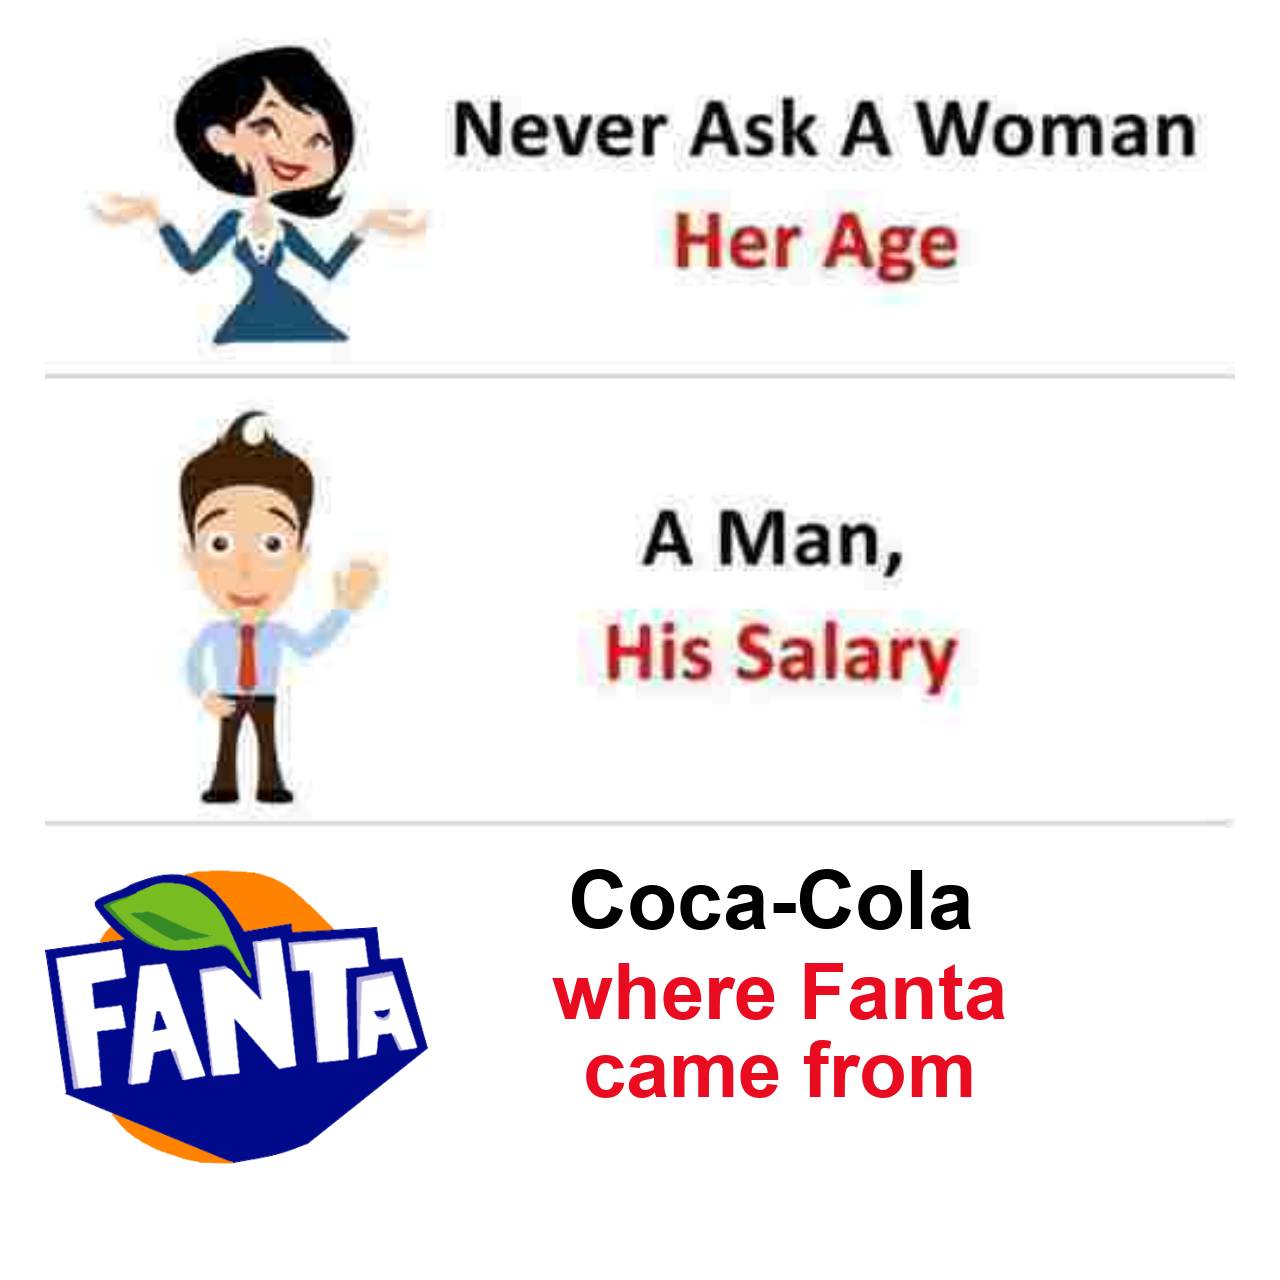 fresh memes - taiwan a country meme - Never Ask A Woman Her Age A Man, His Salary M Fanta CocaCola where Fanta came from